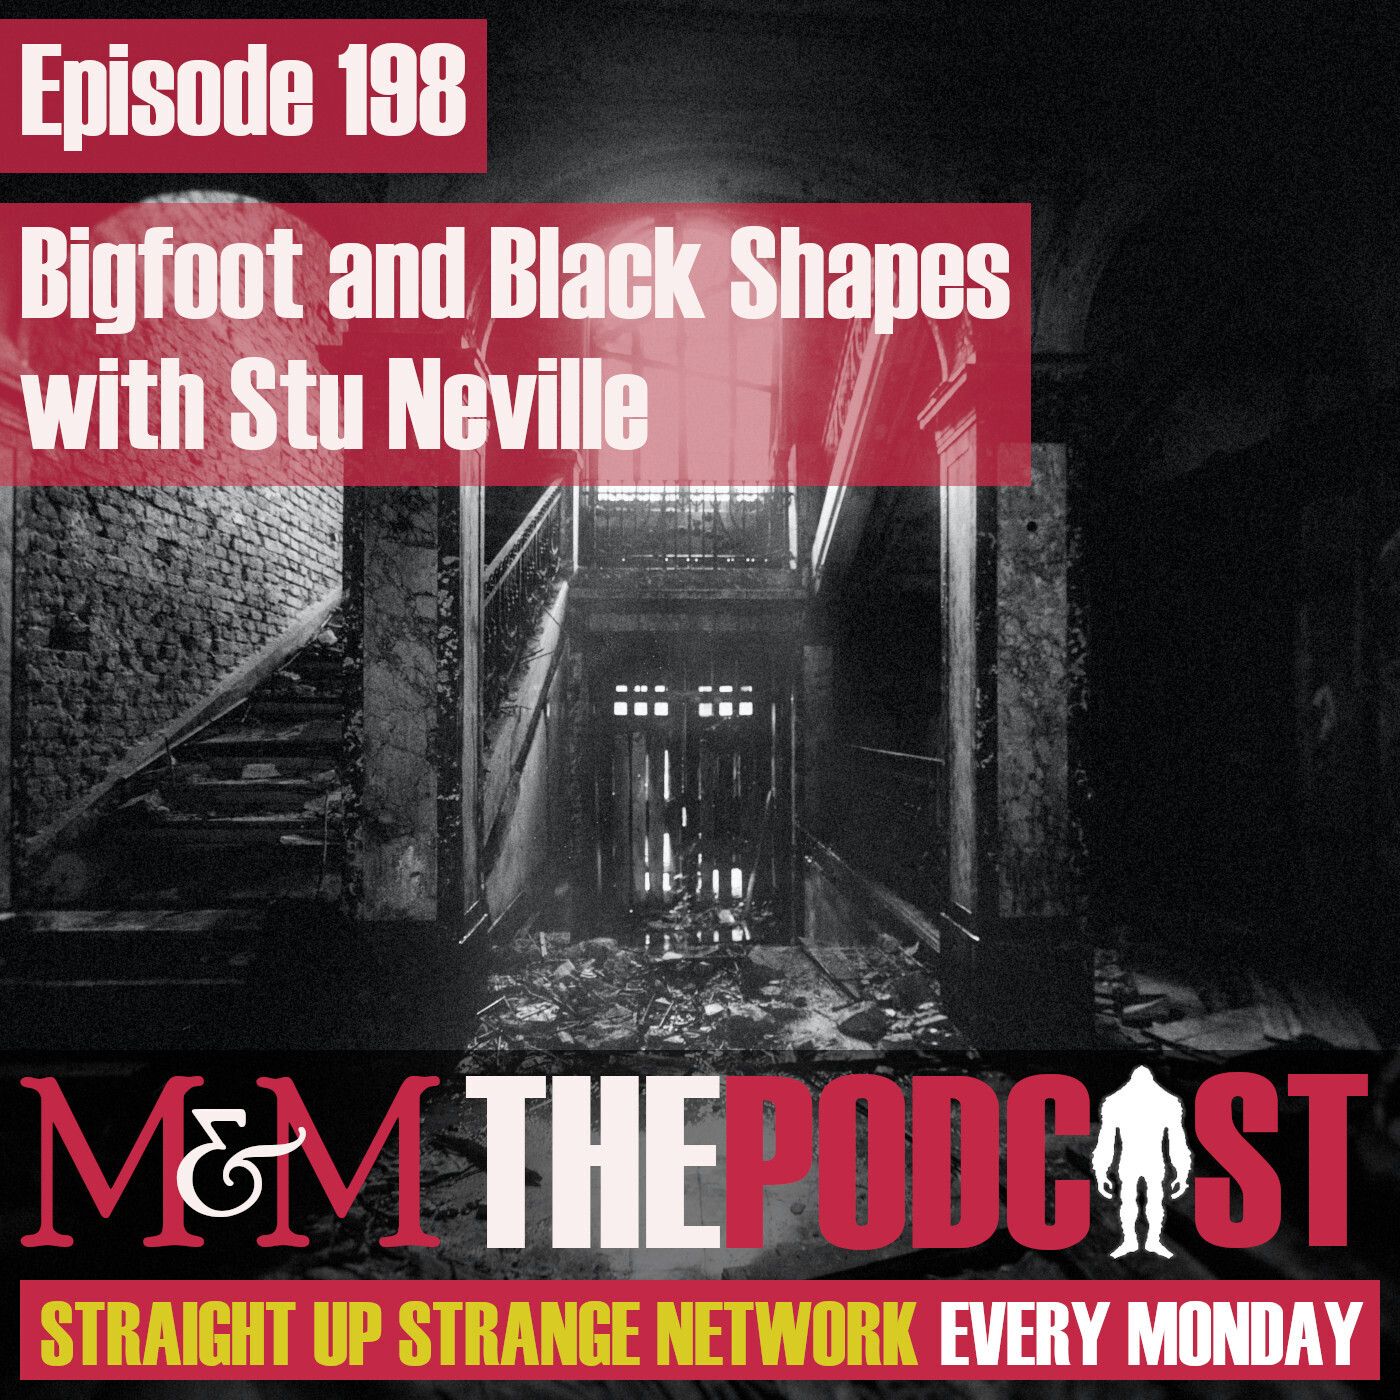 Mysteries and Monsters: Episode 198 Bigfoot and Black Shapes with Stu Neville